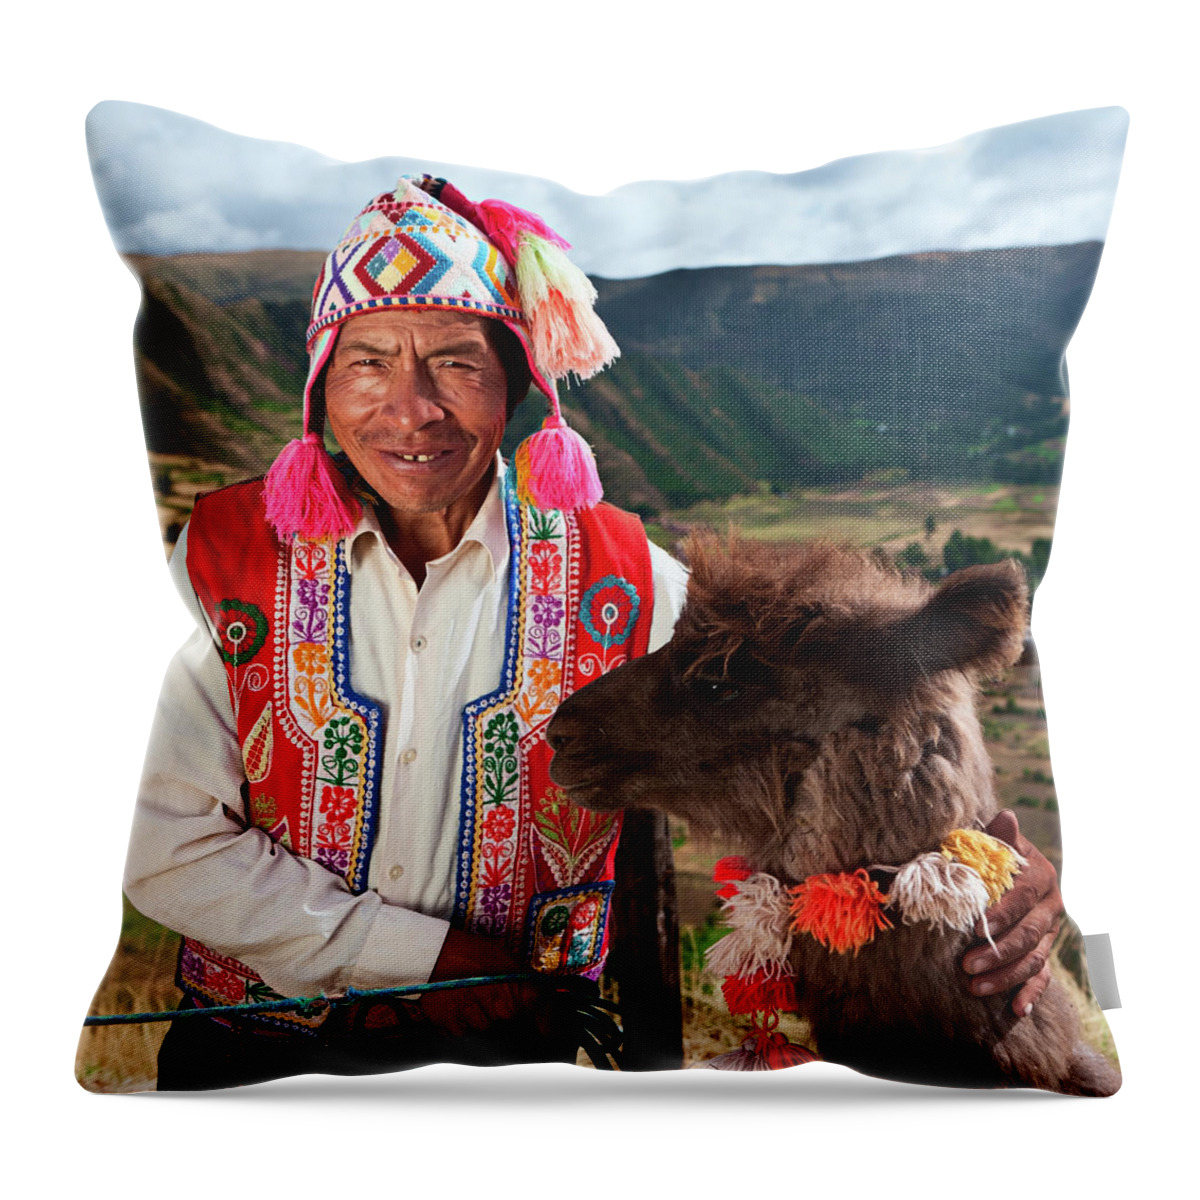 Working Animal Throw Pillow featuring the photograph Portrait Of Peruvian Man Near Pisac by Hadynyah